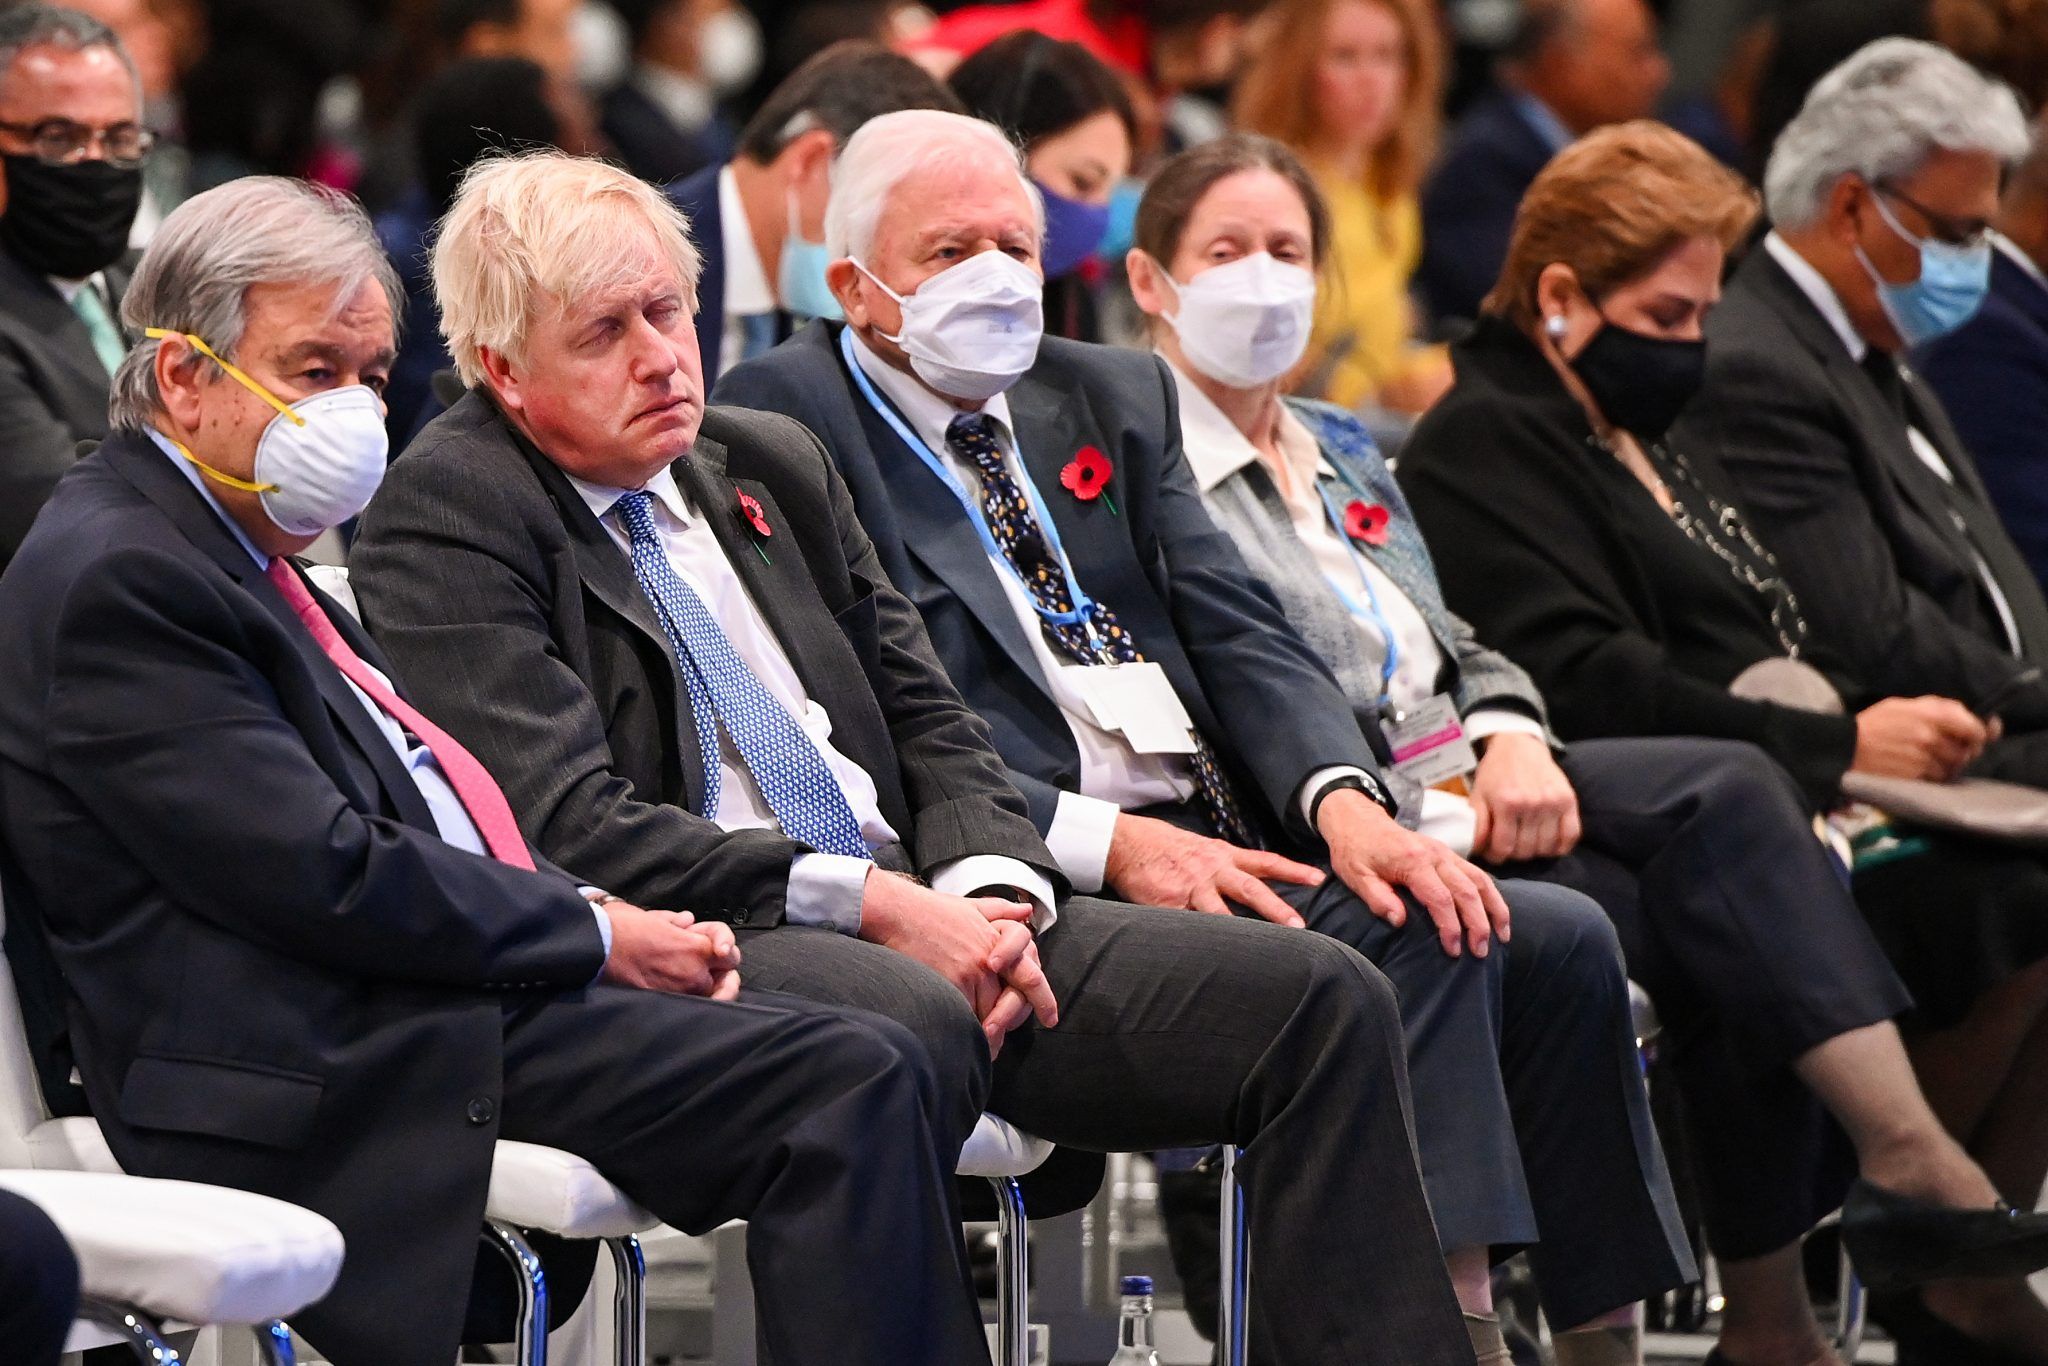 Boris Johnson criticised for not wearing a mask next to Attenborough